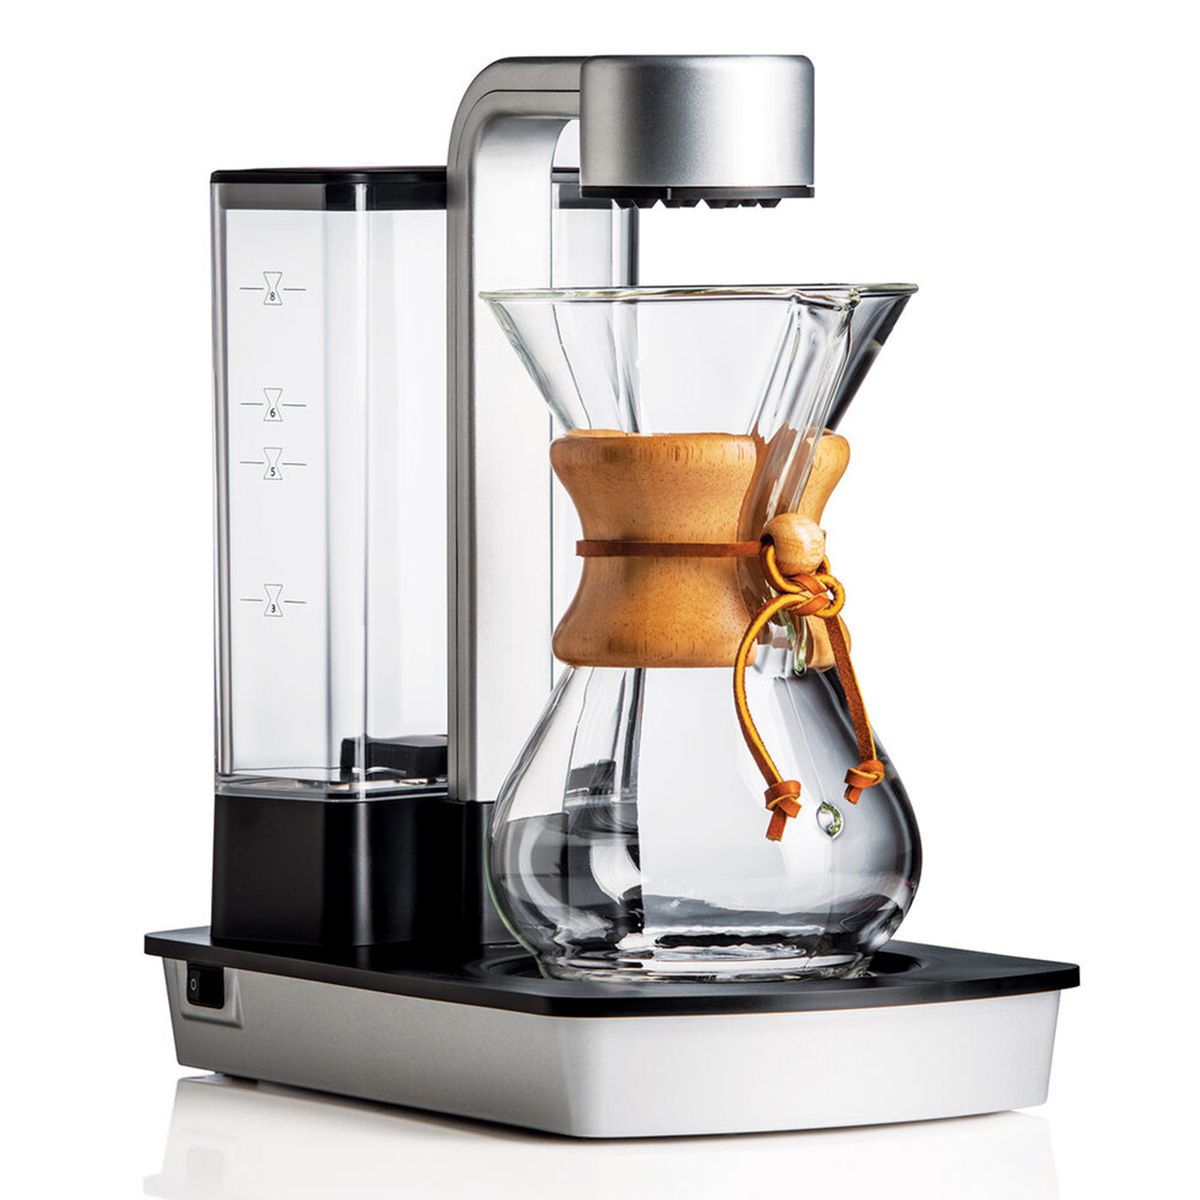 The 11 Best Drip Coffee Makers of 2021, According to Reviews Food & Wine